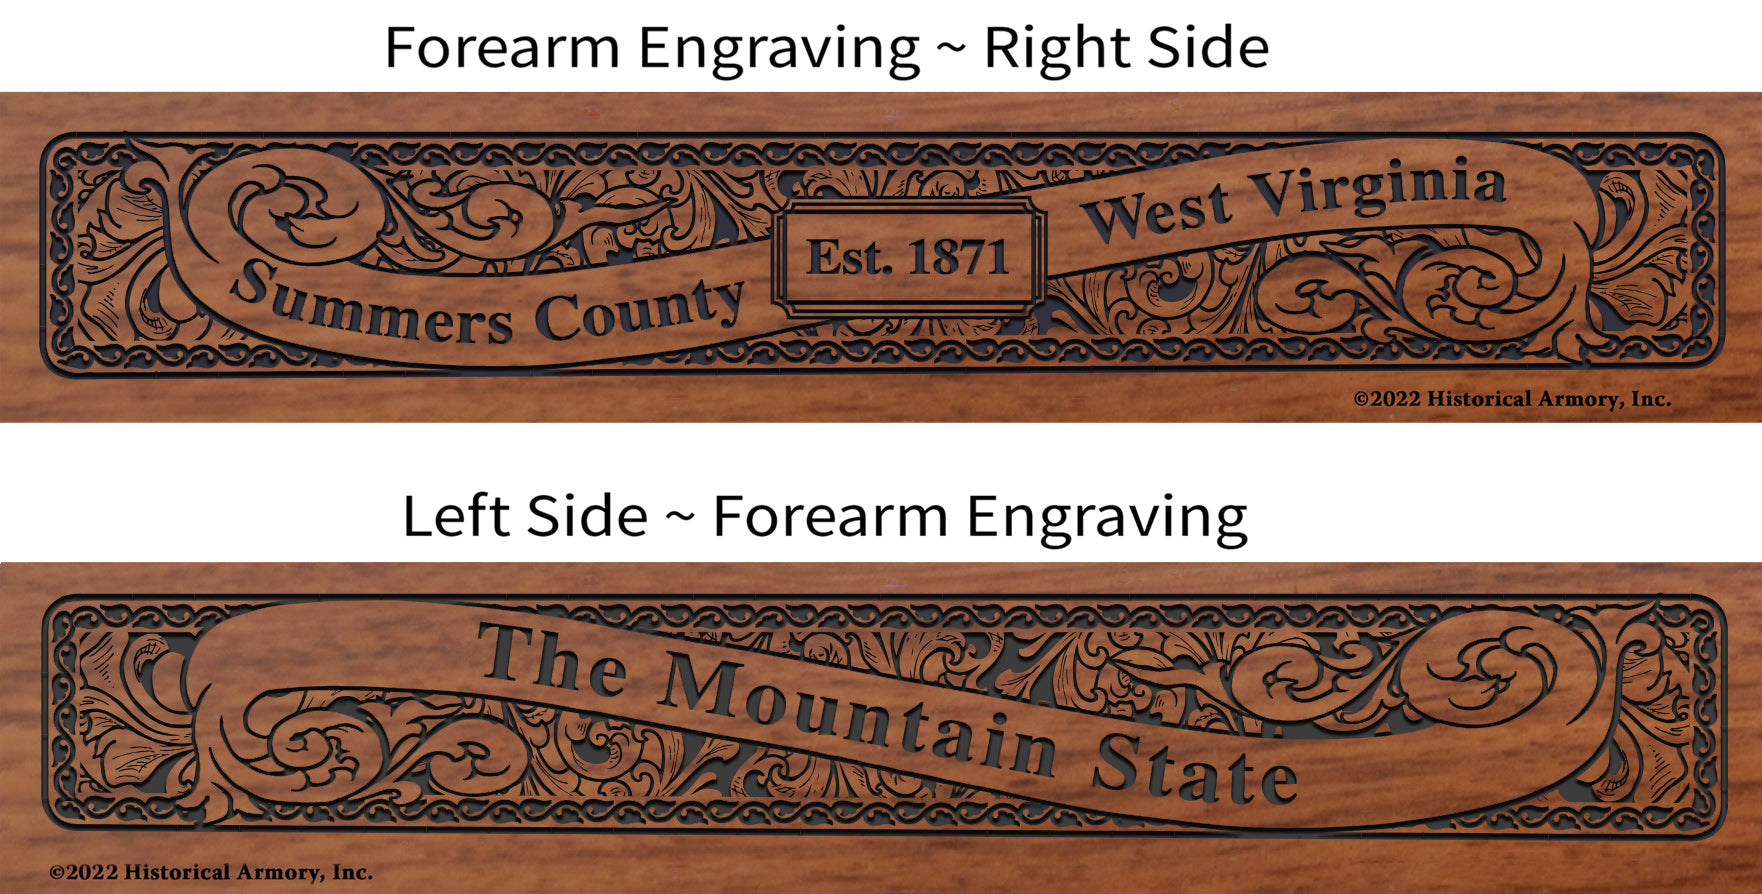 Summers County West Virginia Engraved Rifle Forearm